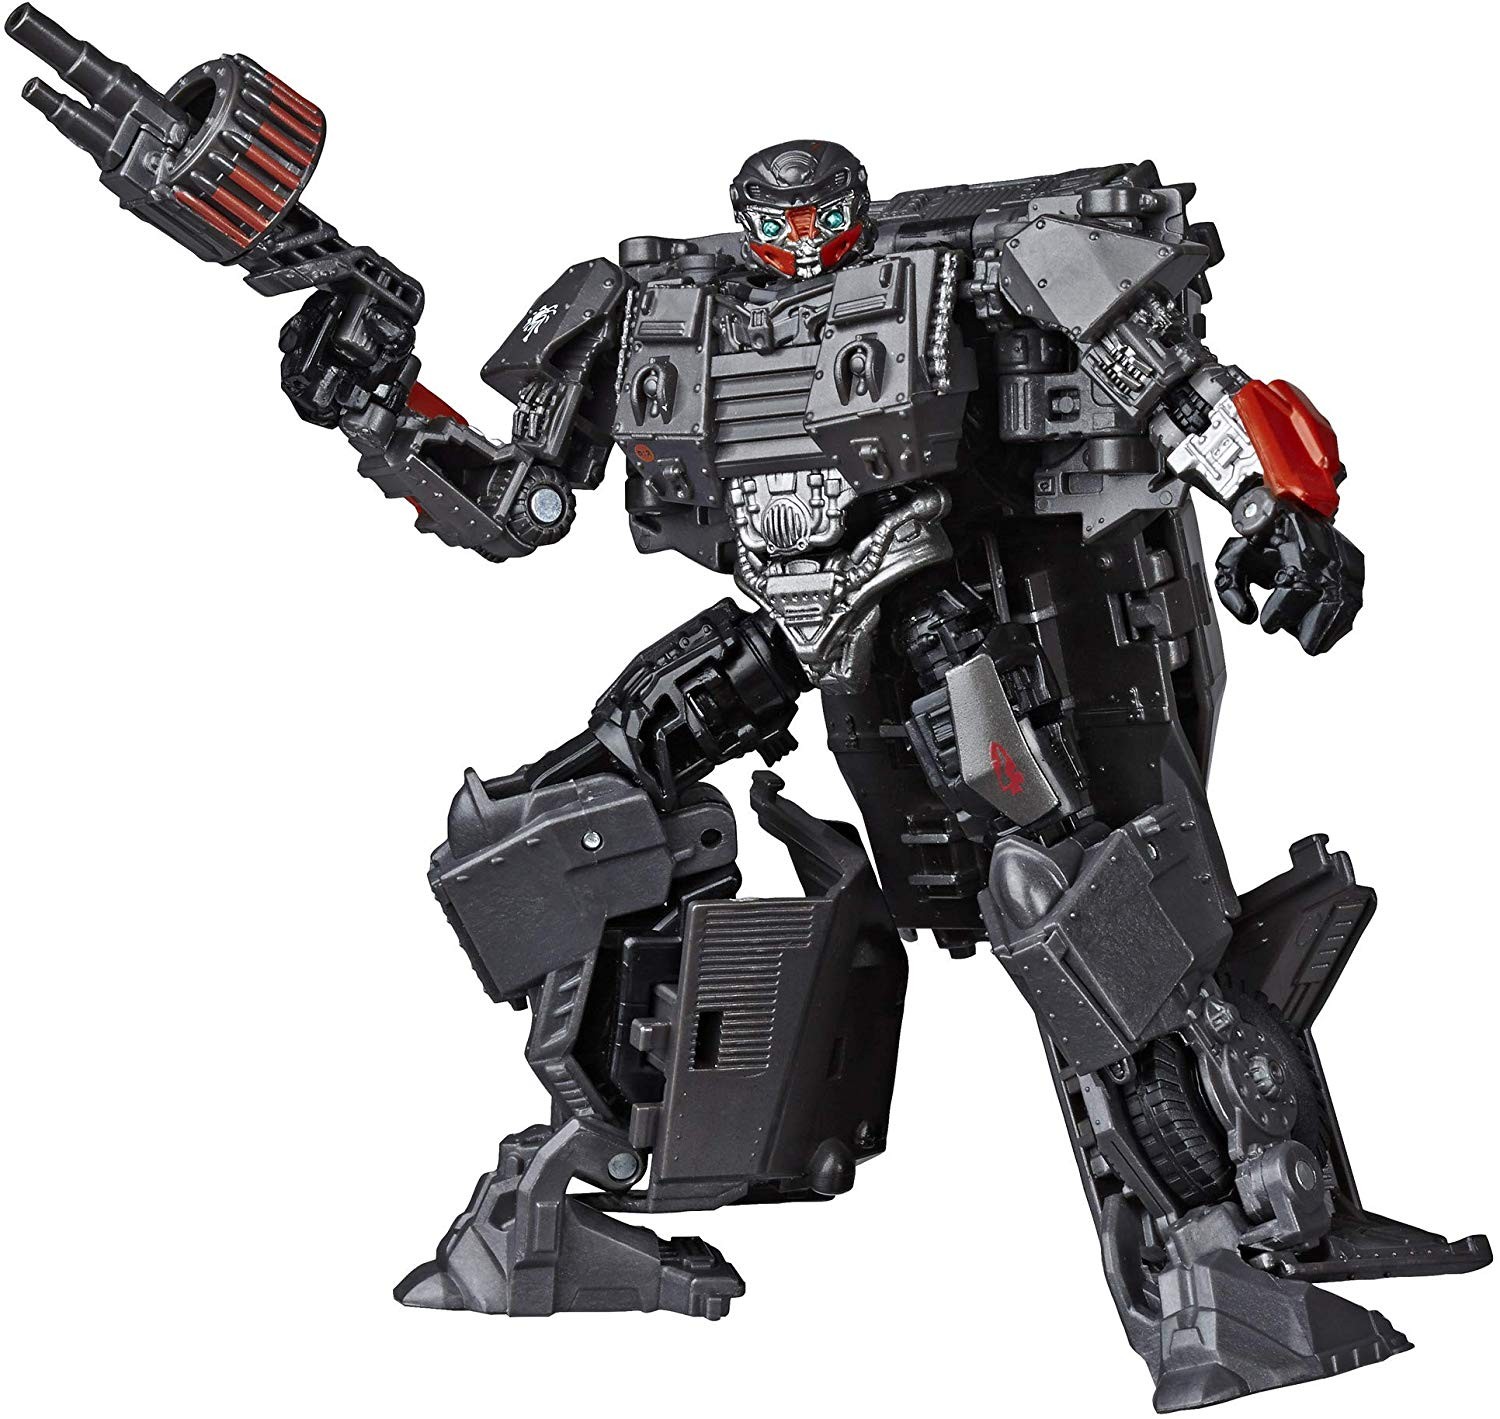 Transformers News: Just-released Studio Series and SIEGE figures available on Amazon.com